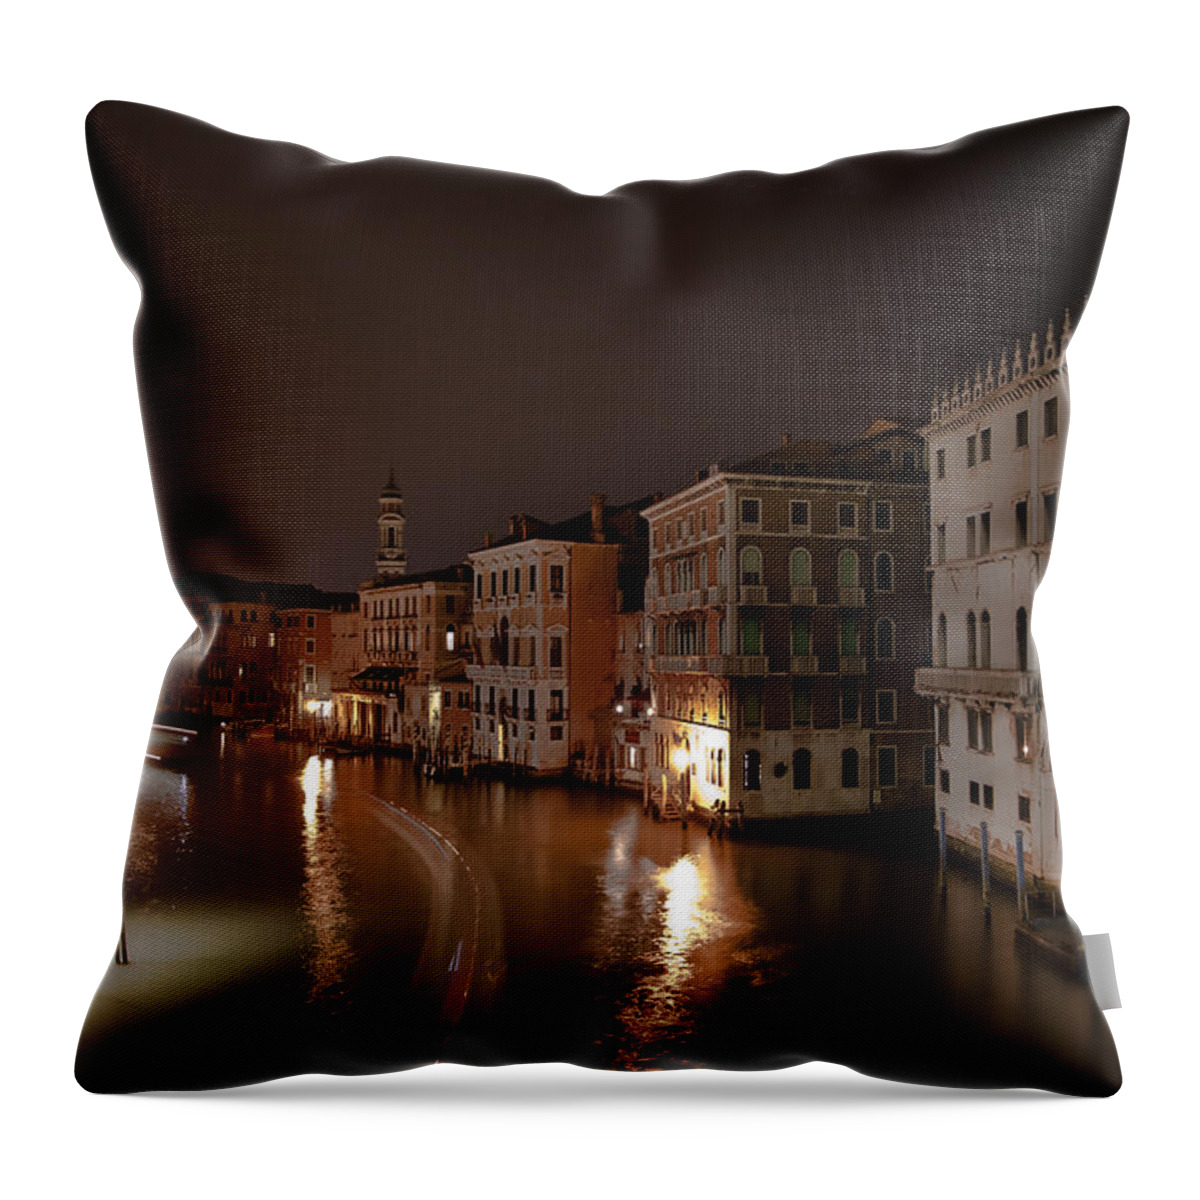 Architecture Throw Pillow featuring the photograph Venice by night by Joana Kruse